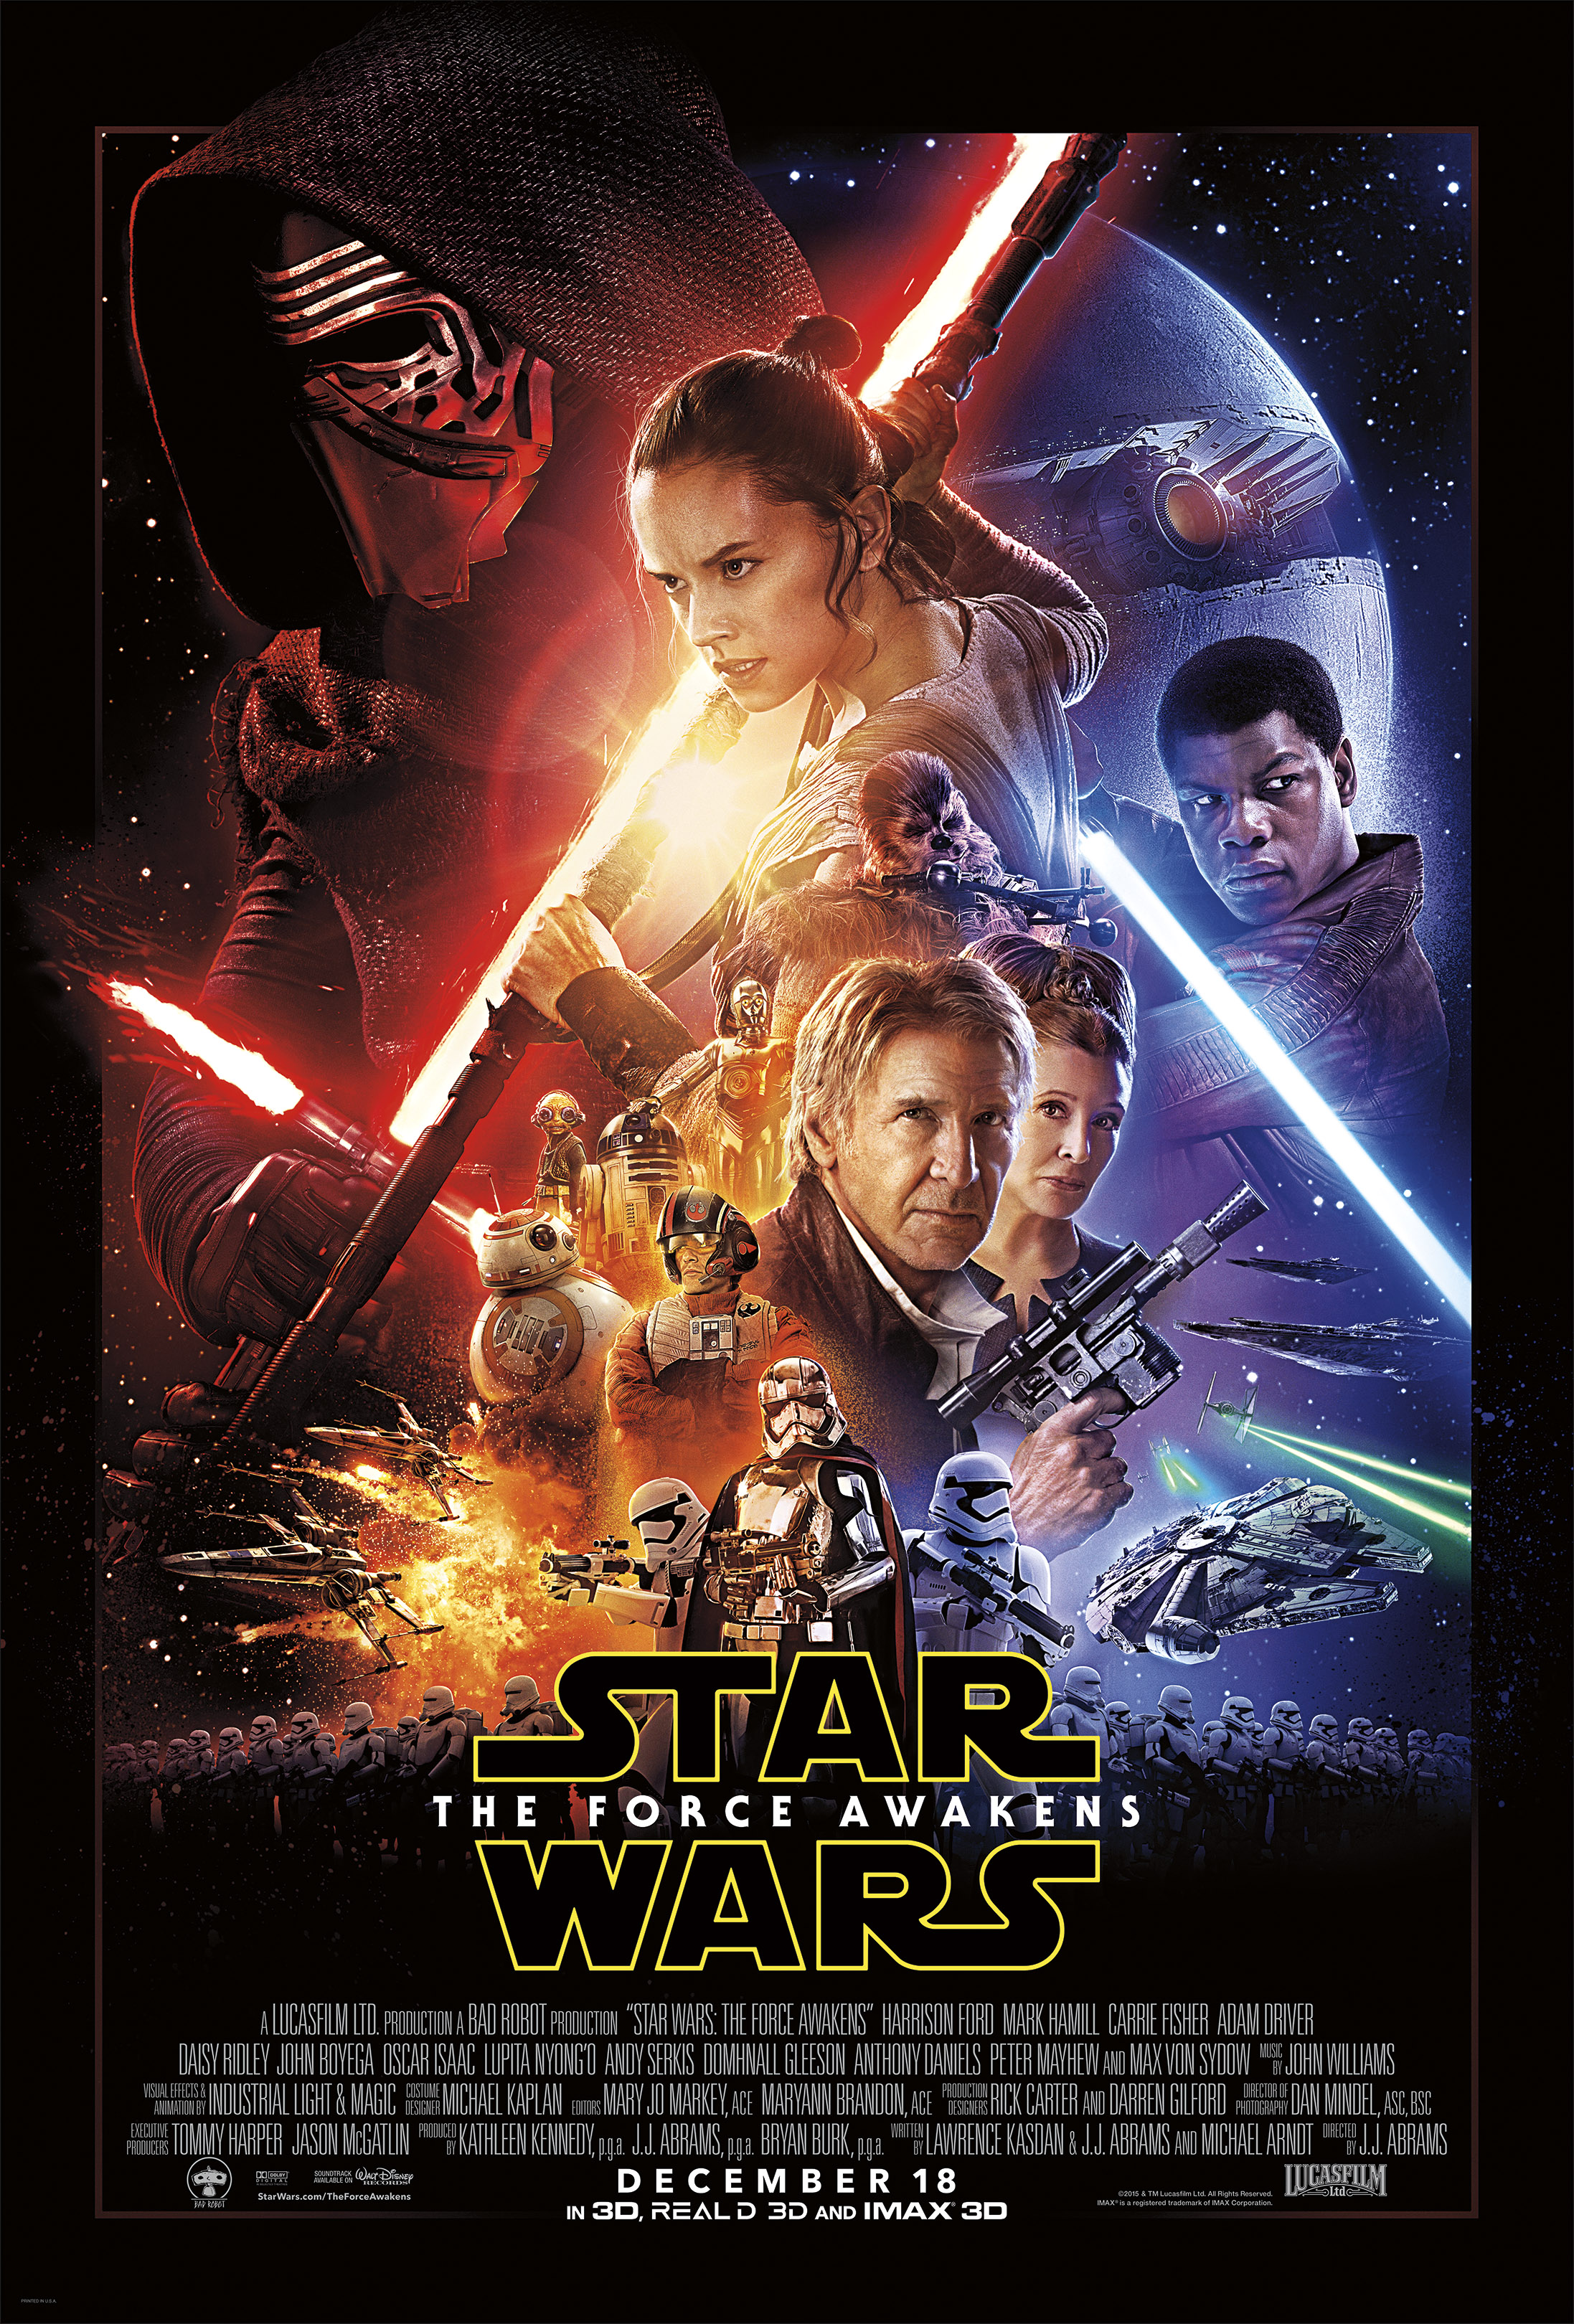 Star Wars Episode VII The Force Awakens movie poster